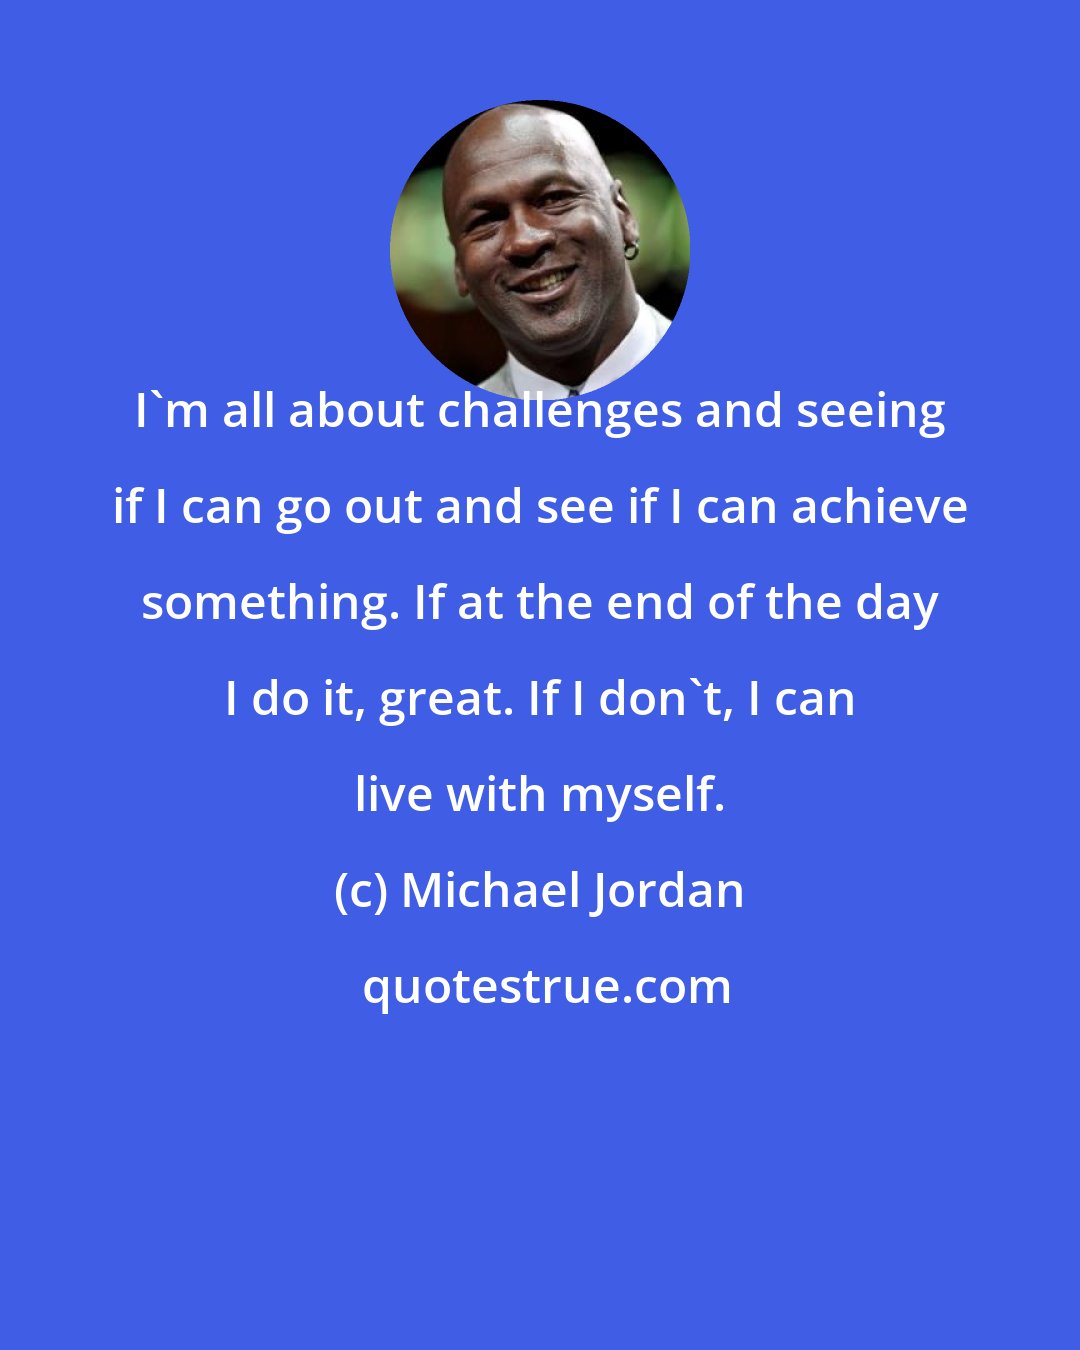 Michael Jordan: I'm all about challenges and seeing if I can go out and see if I can achieve something. If at the end of the day I do it, great. If I don't, I can live with myself.